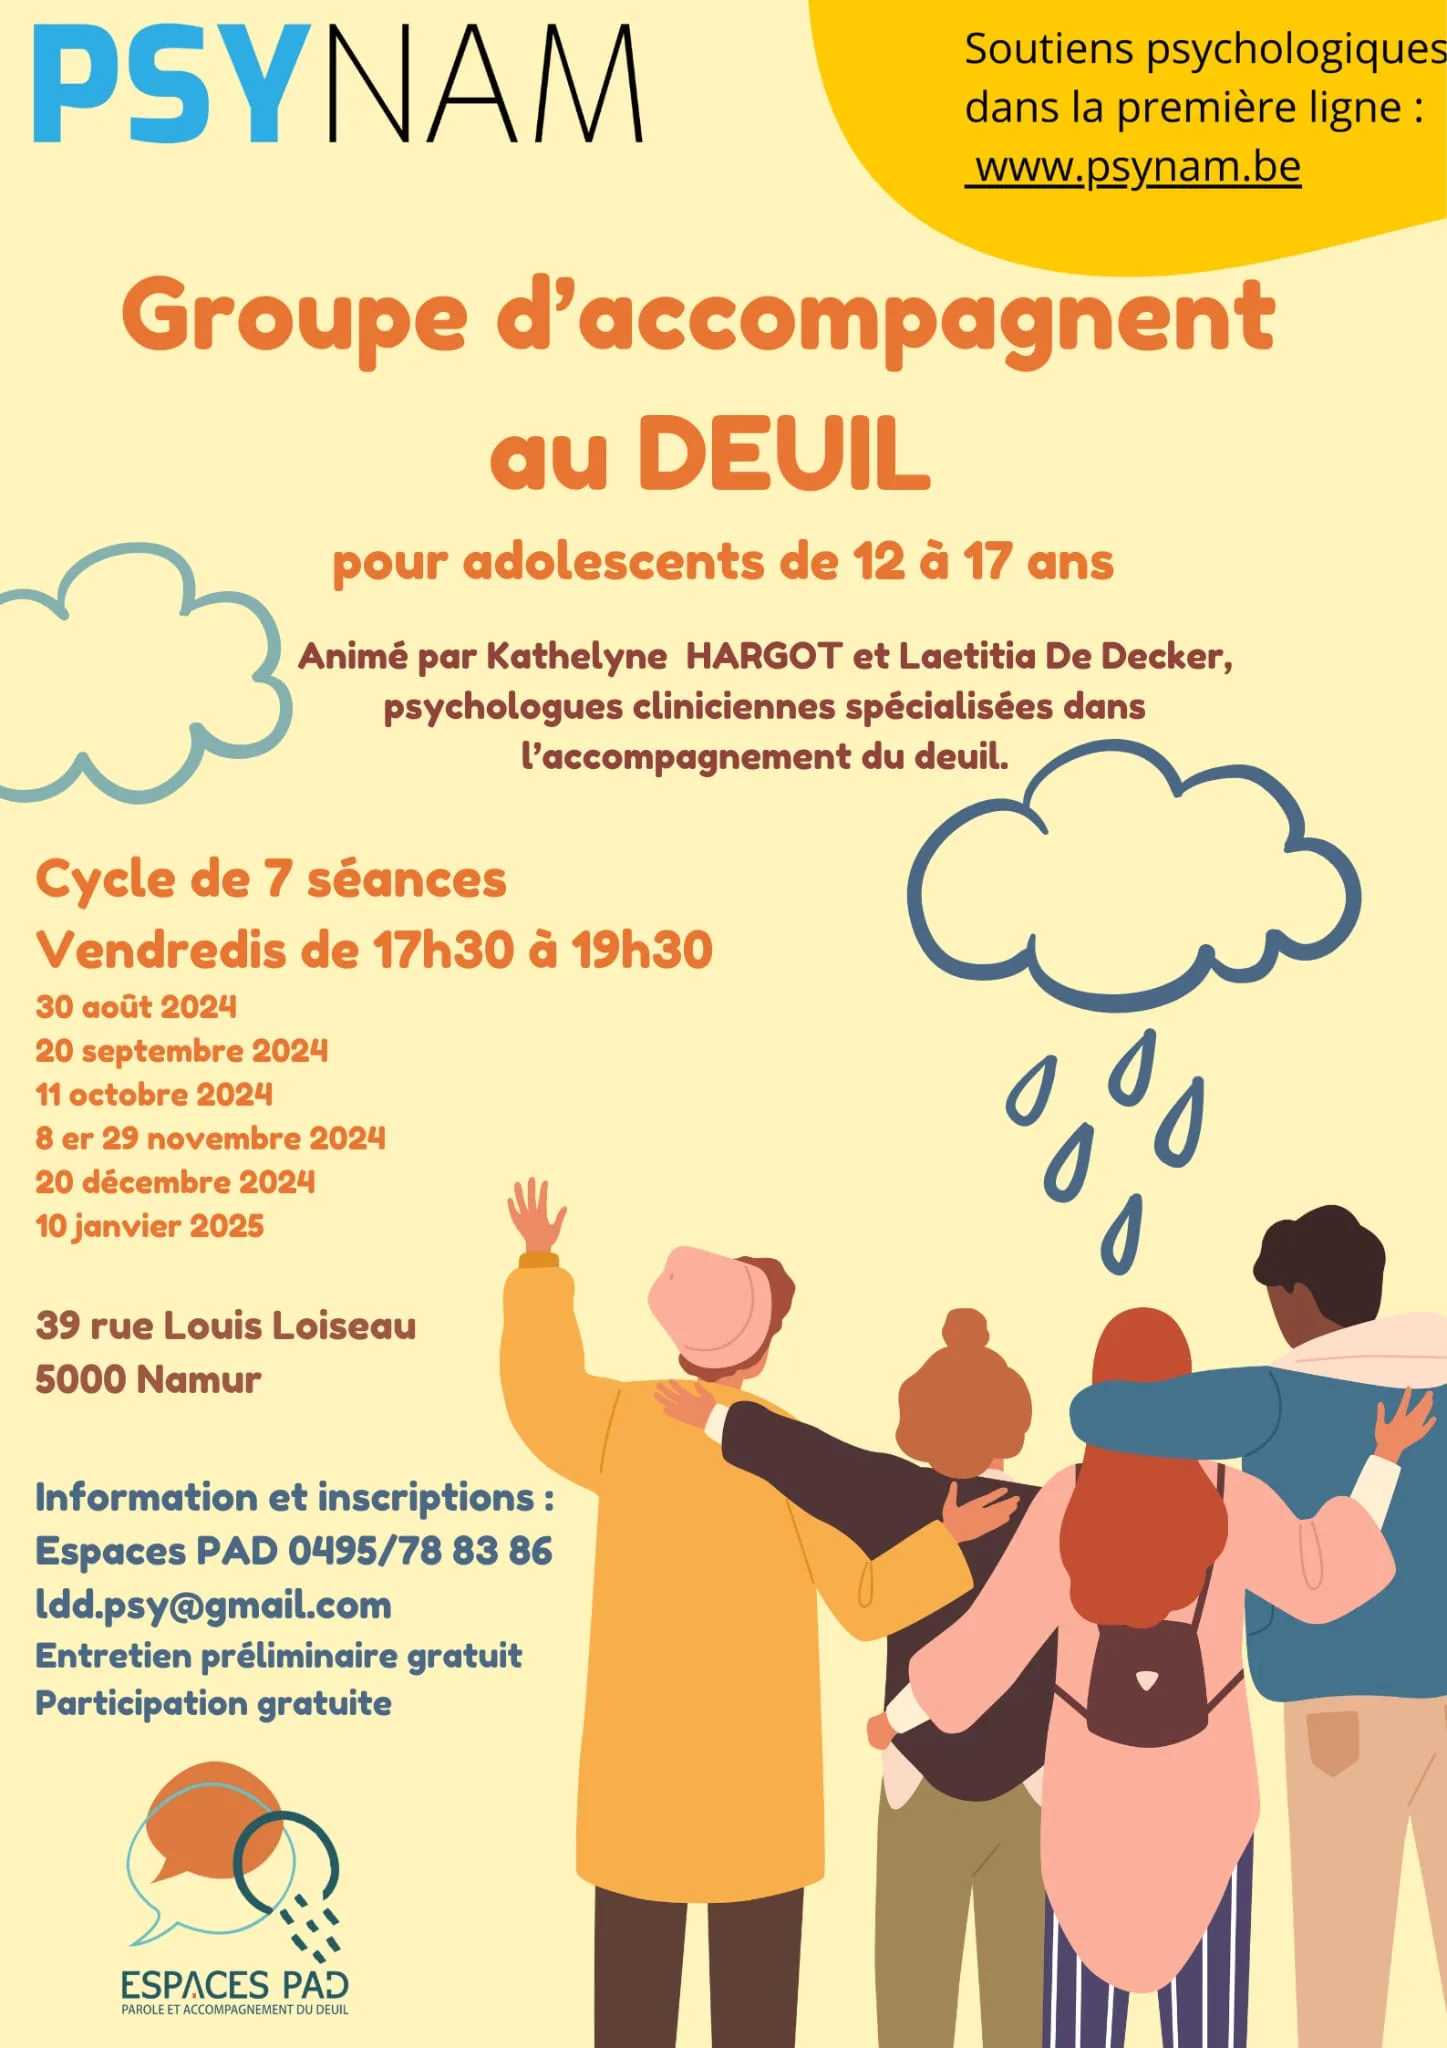 Groupe d'accompagnent au deuil